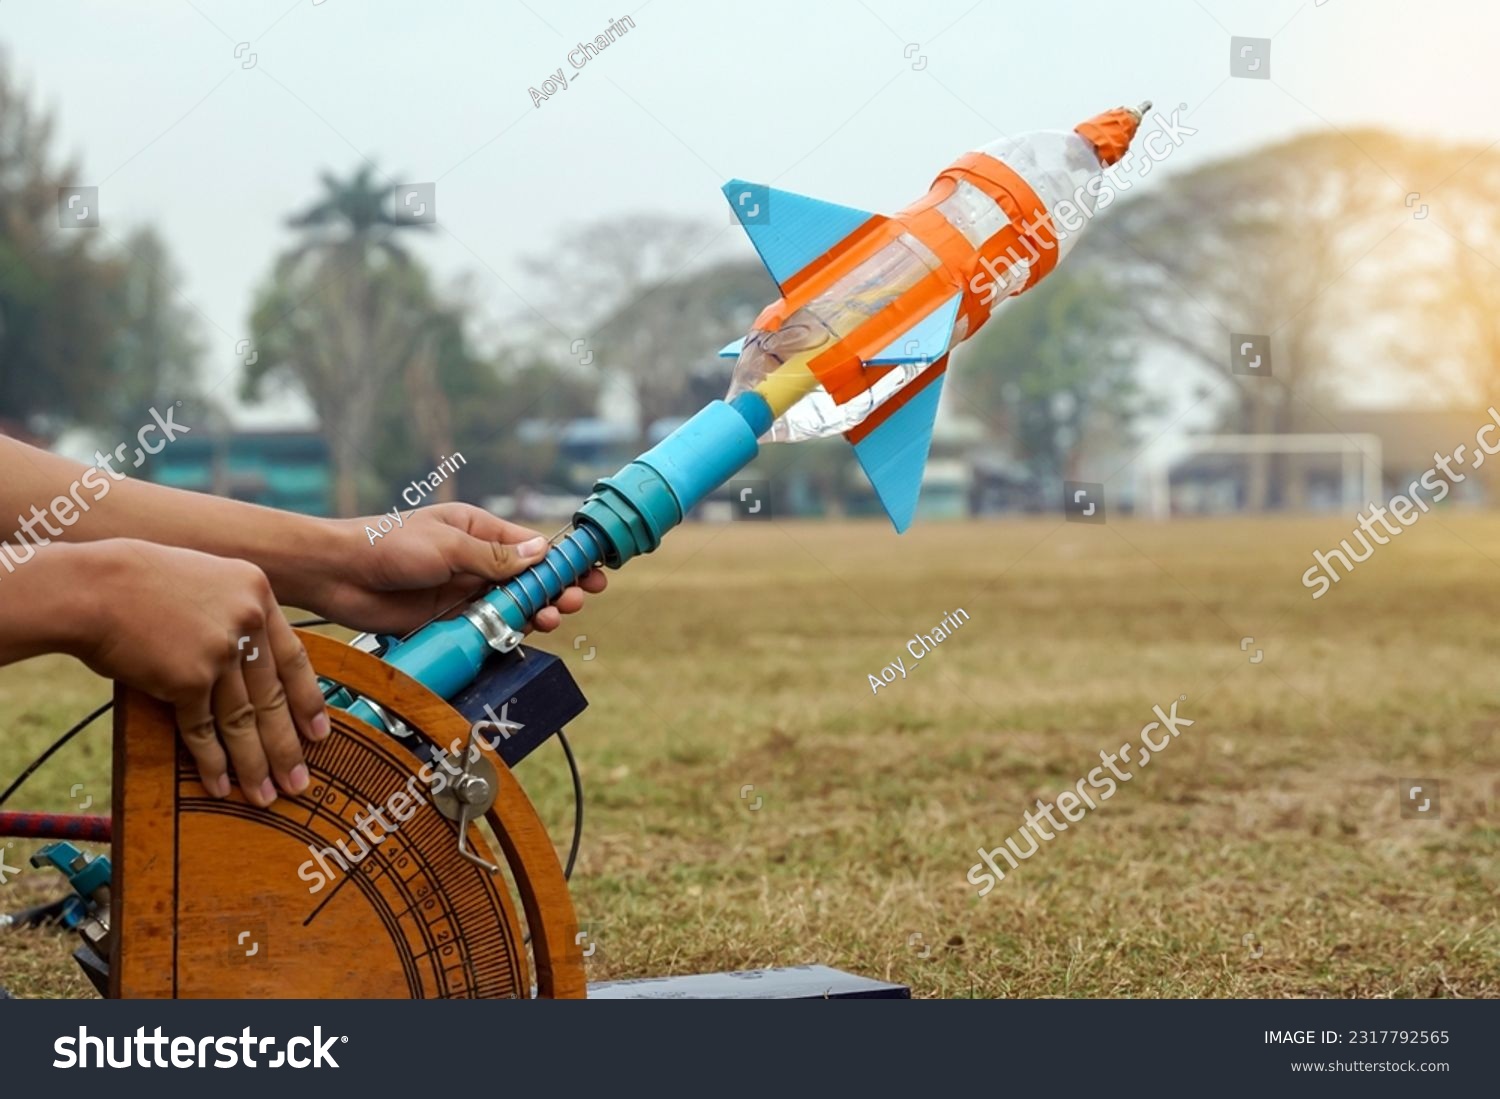 water rocket on launch pad. It is an activity that promotes science knowledge and skills for children. Children have thinking skills, problem-solving, creativity, happiness, and fun.                   #2317792565